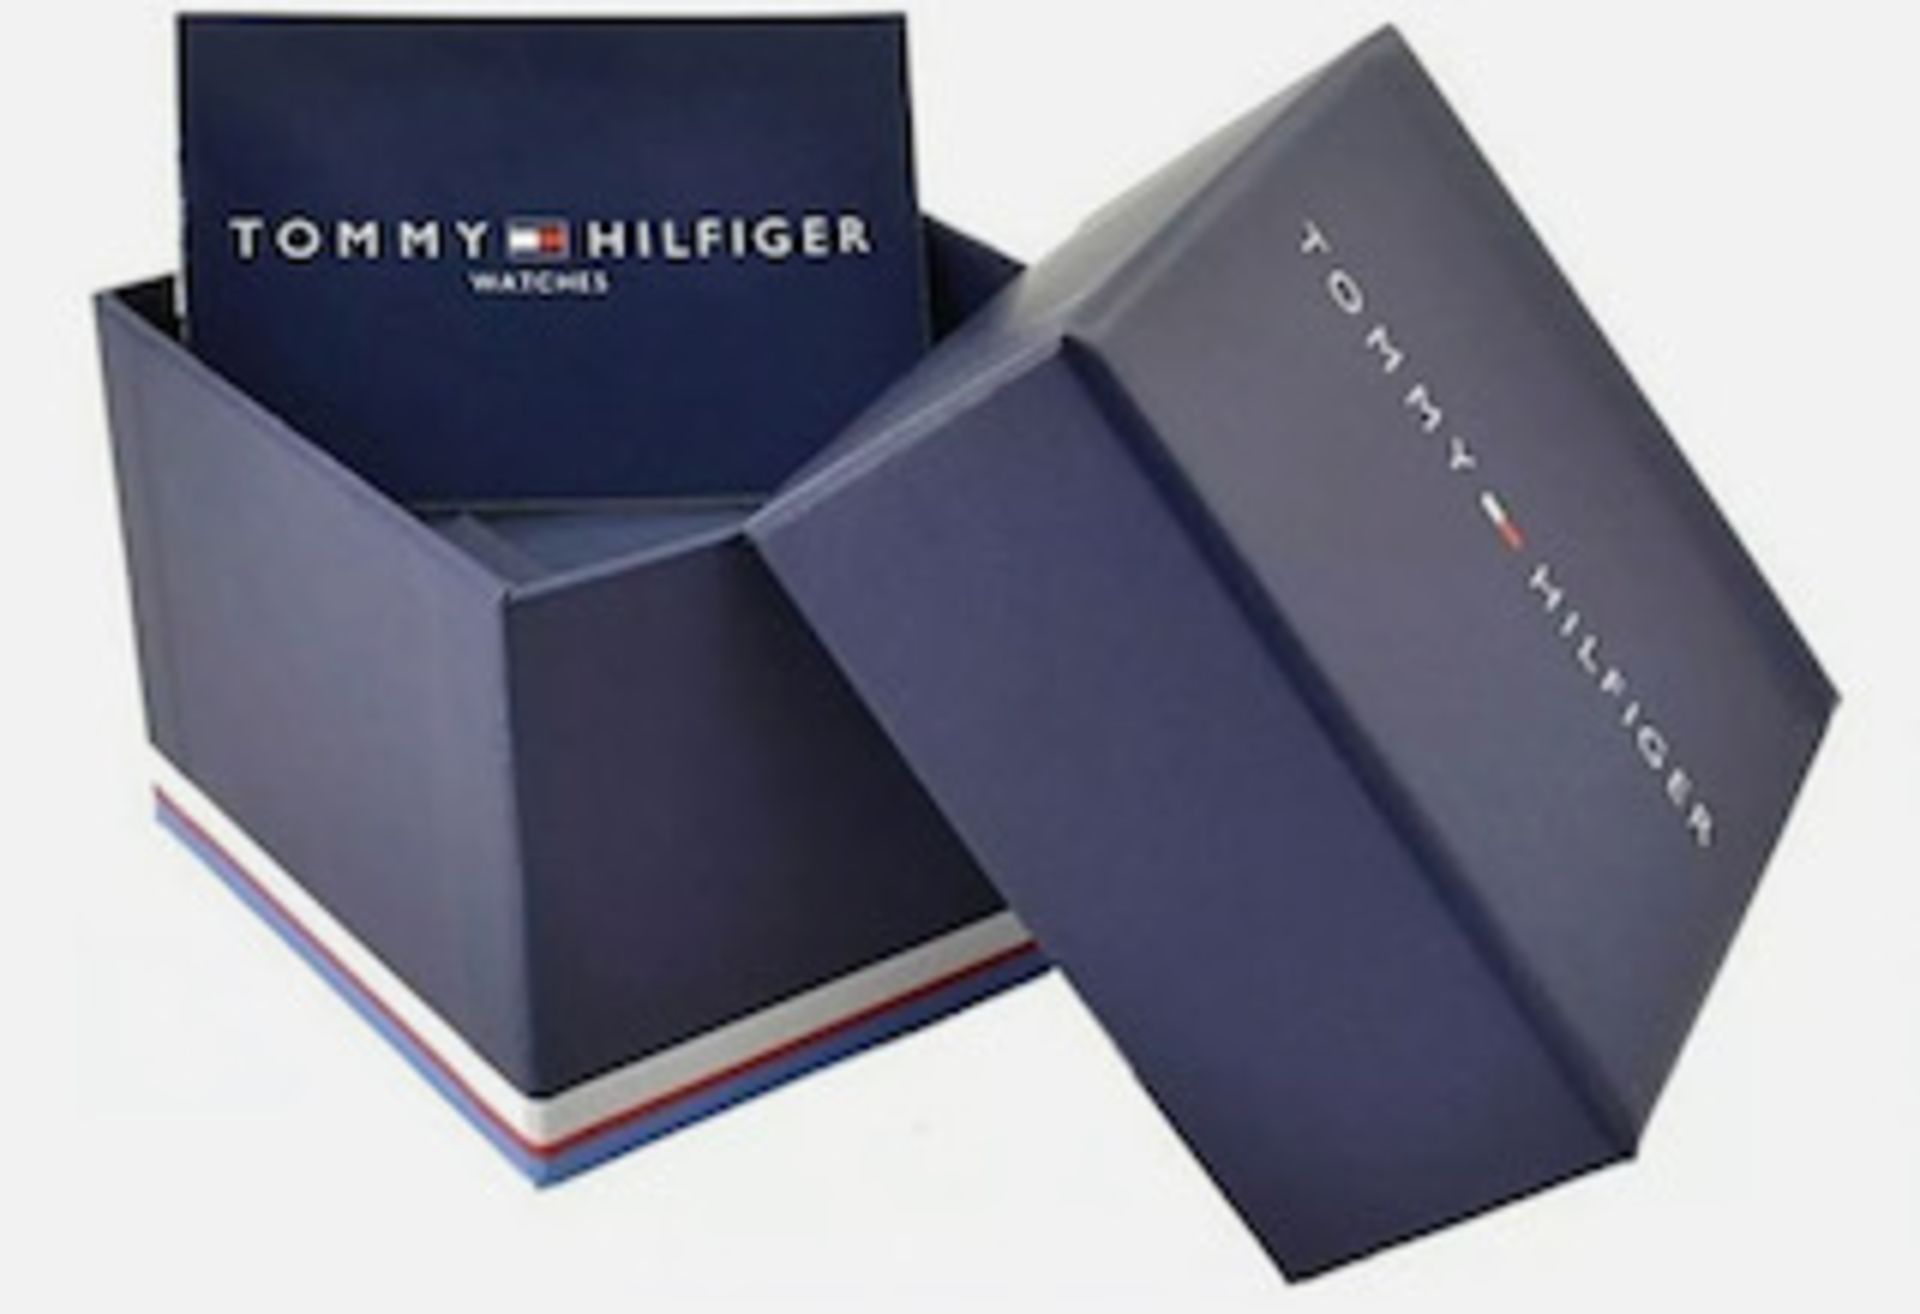 Tommy Hilfiger Men's Multi Dial Quartz Watch With Stainless Steel Strap 1791534 - Image 5 of 5